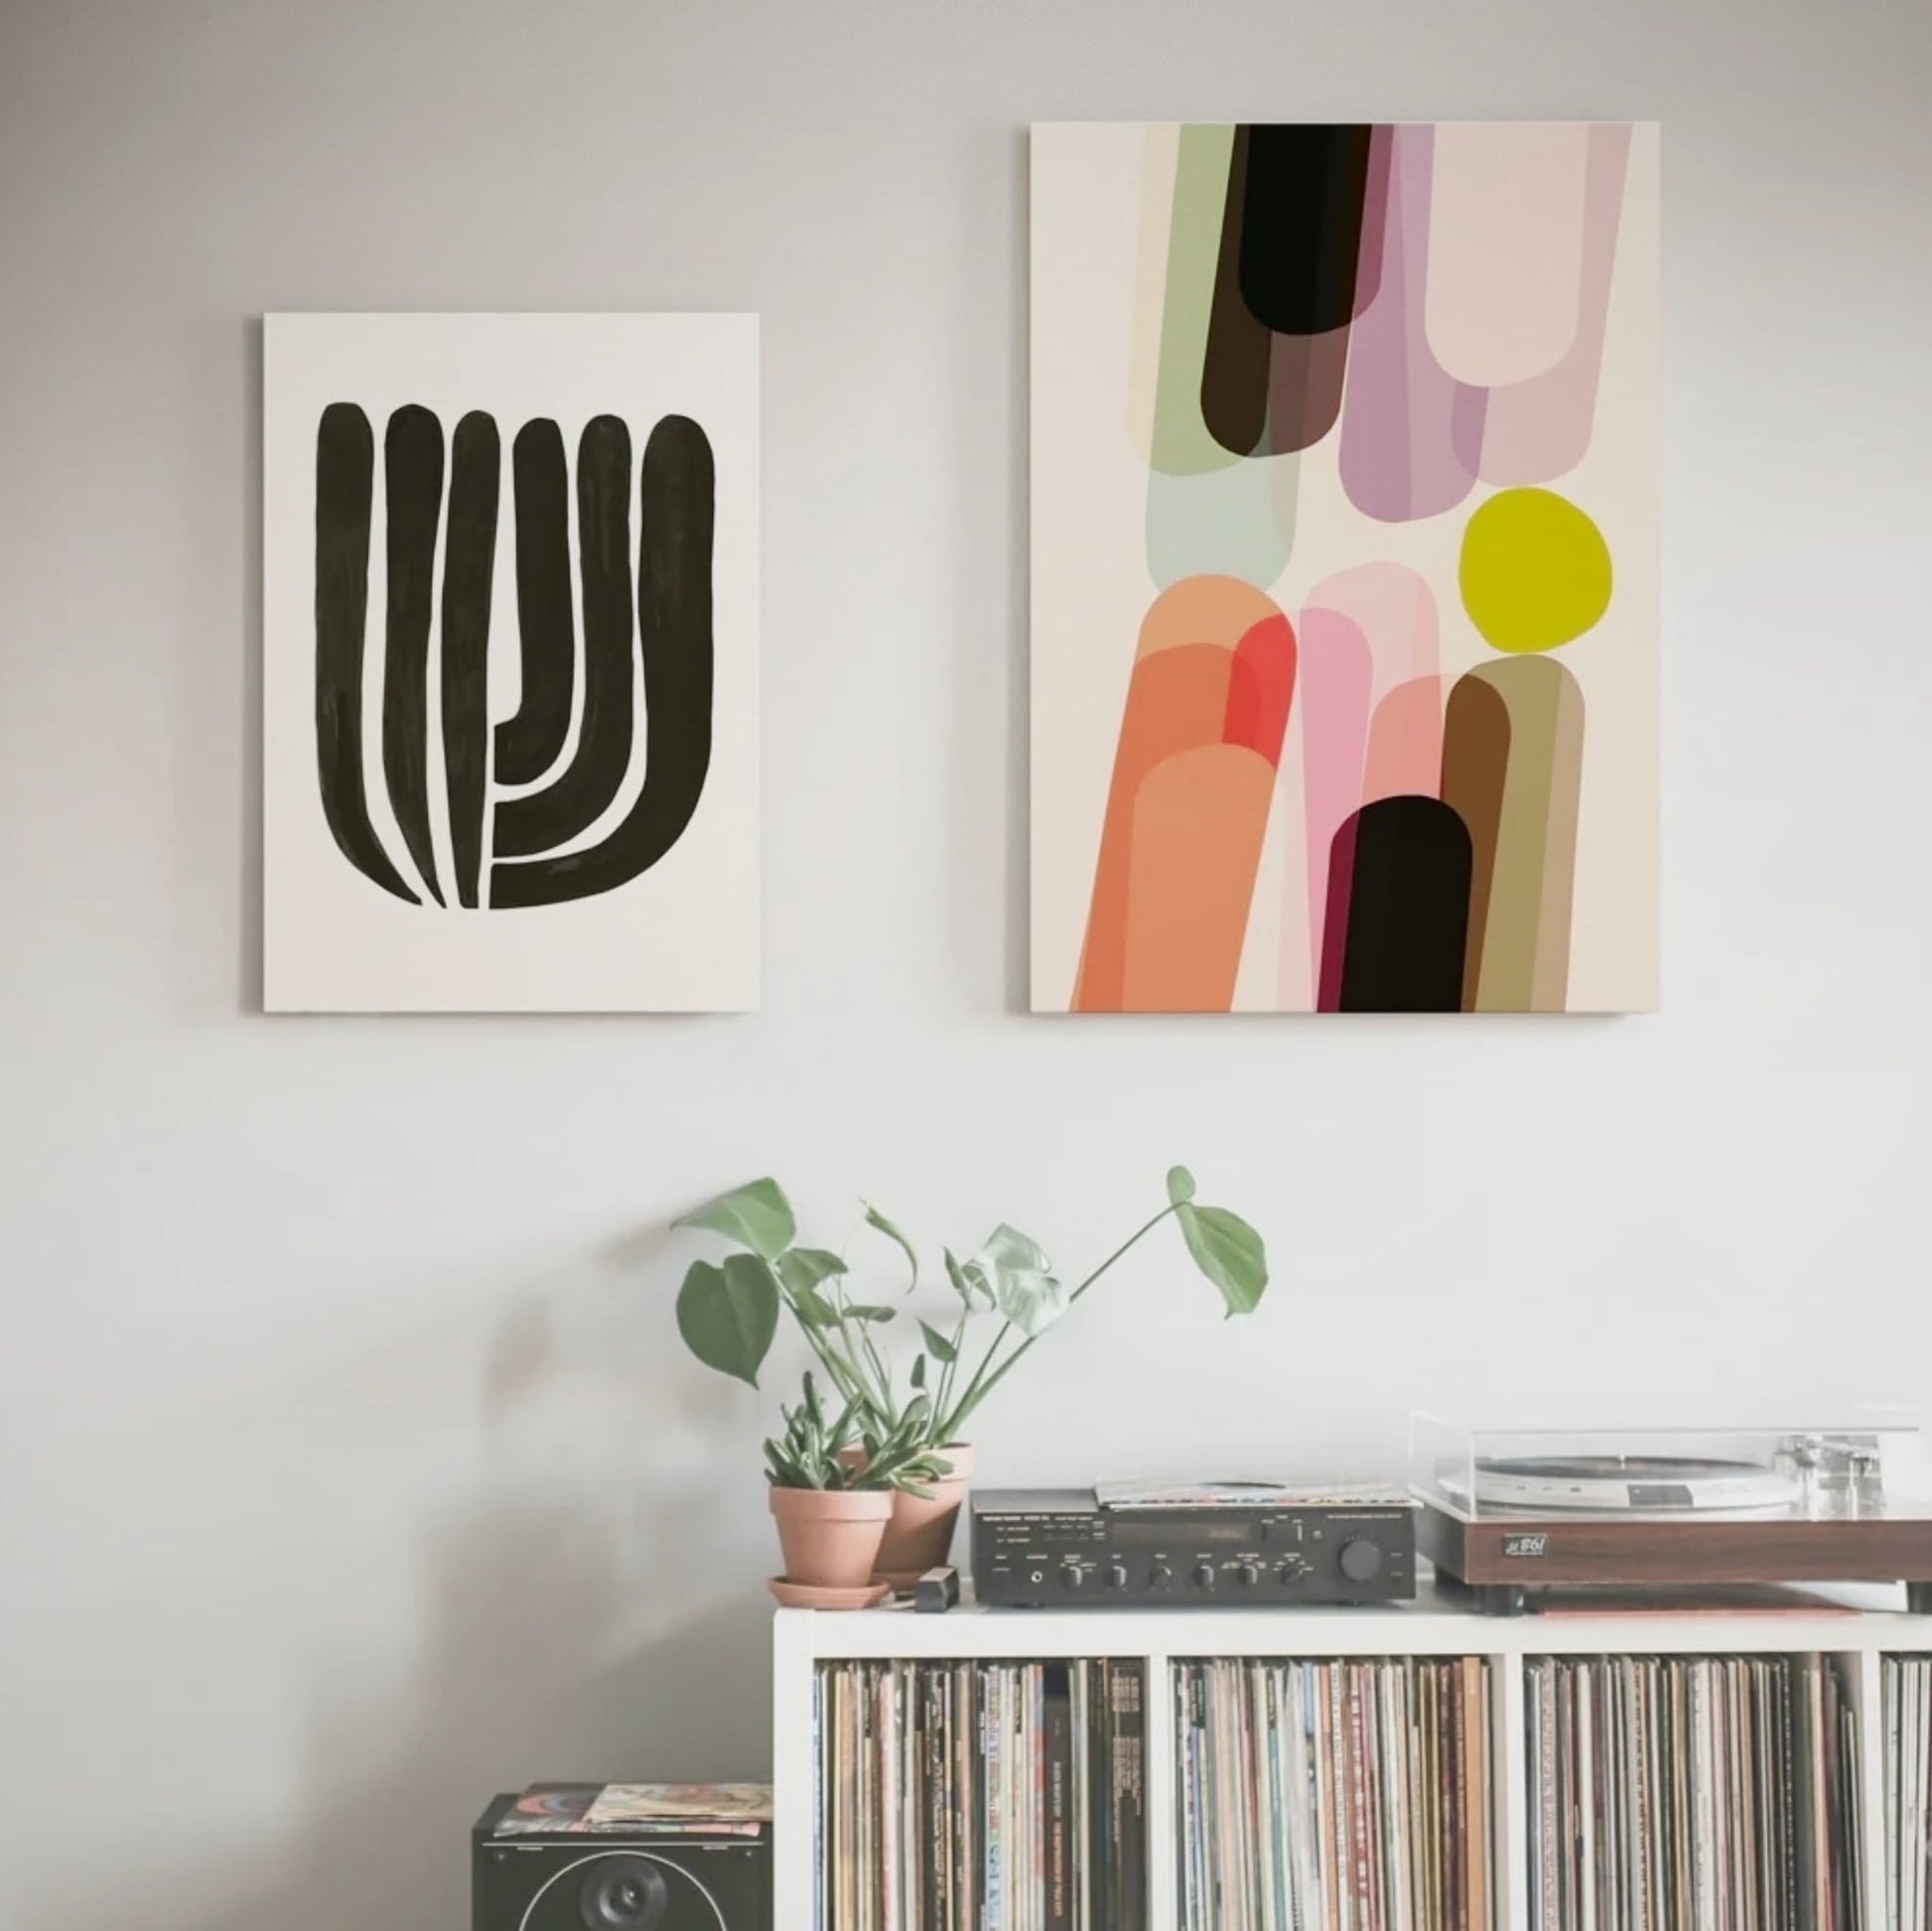 Two Prints Hung Above Shelving holding records and record player.